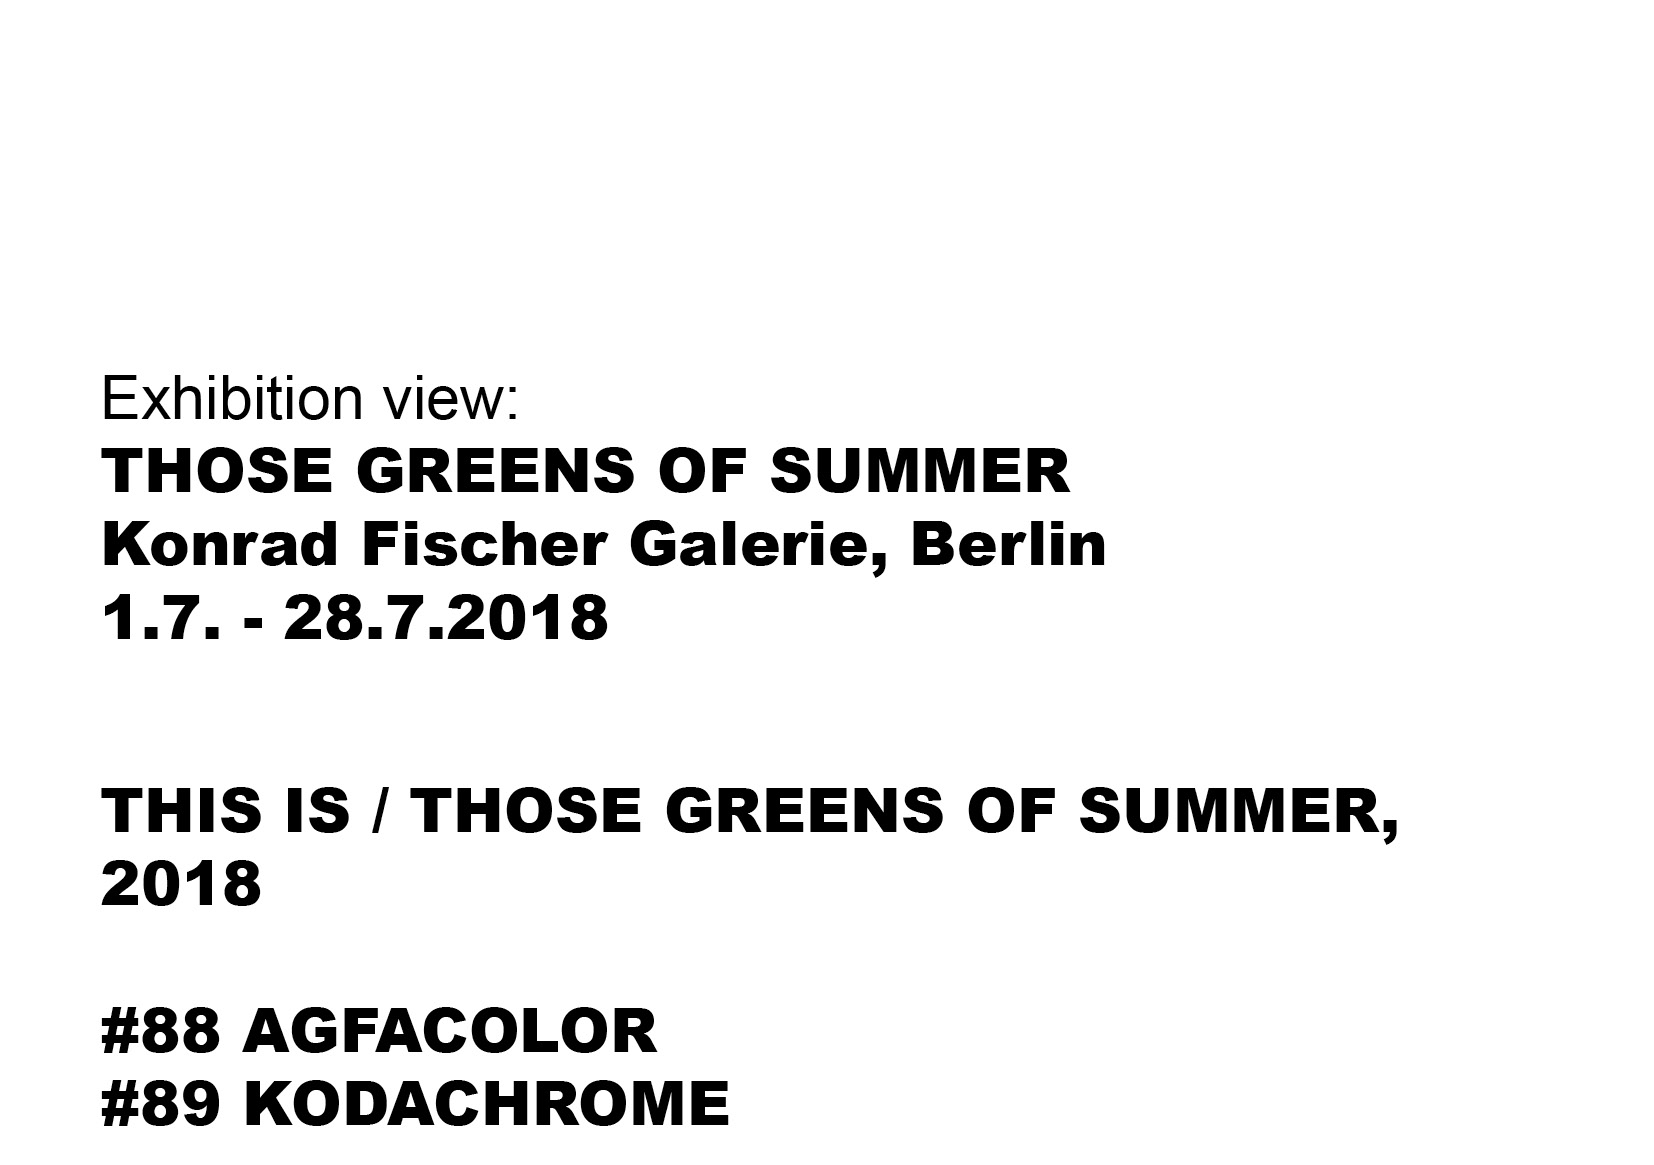 this is / those greens of summer